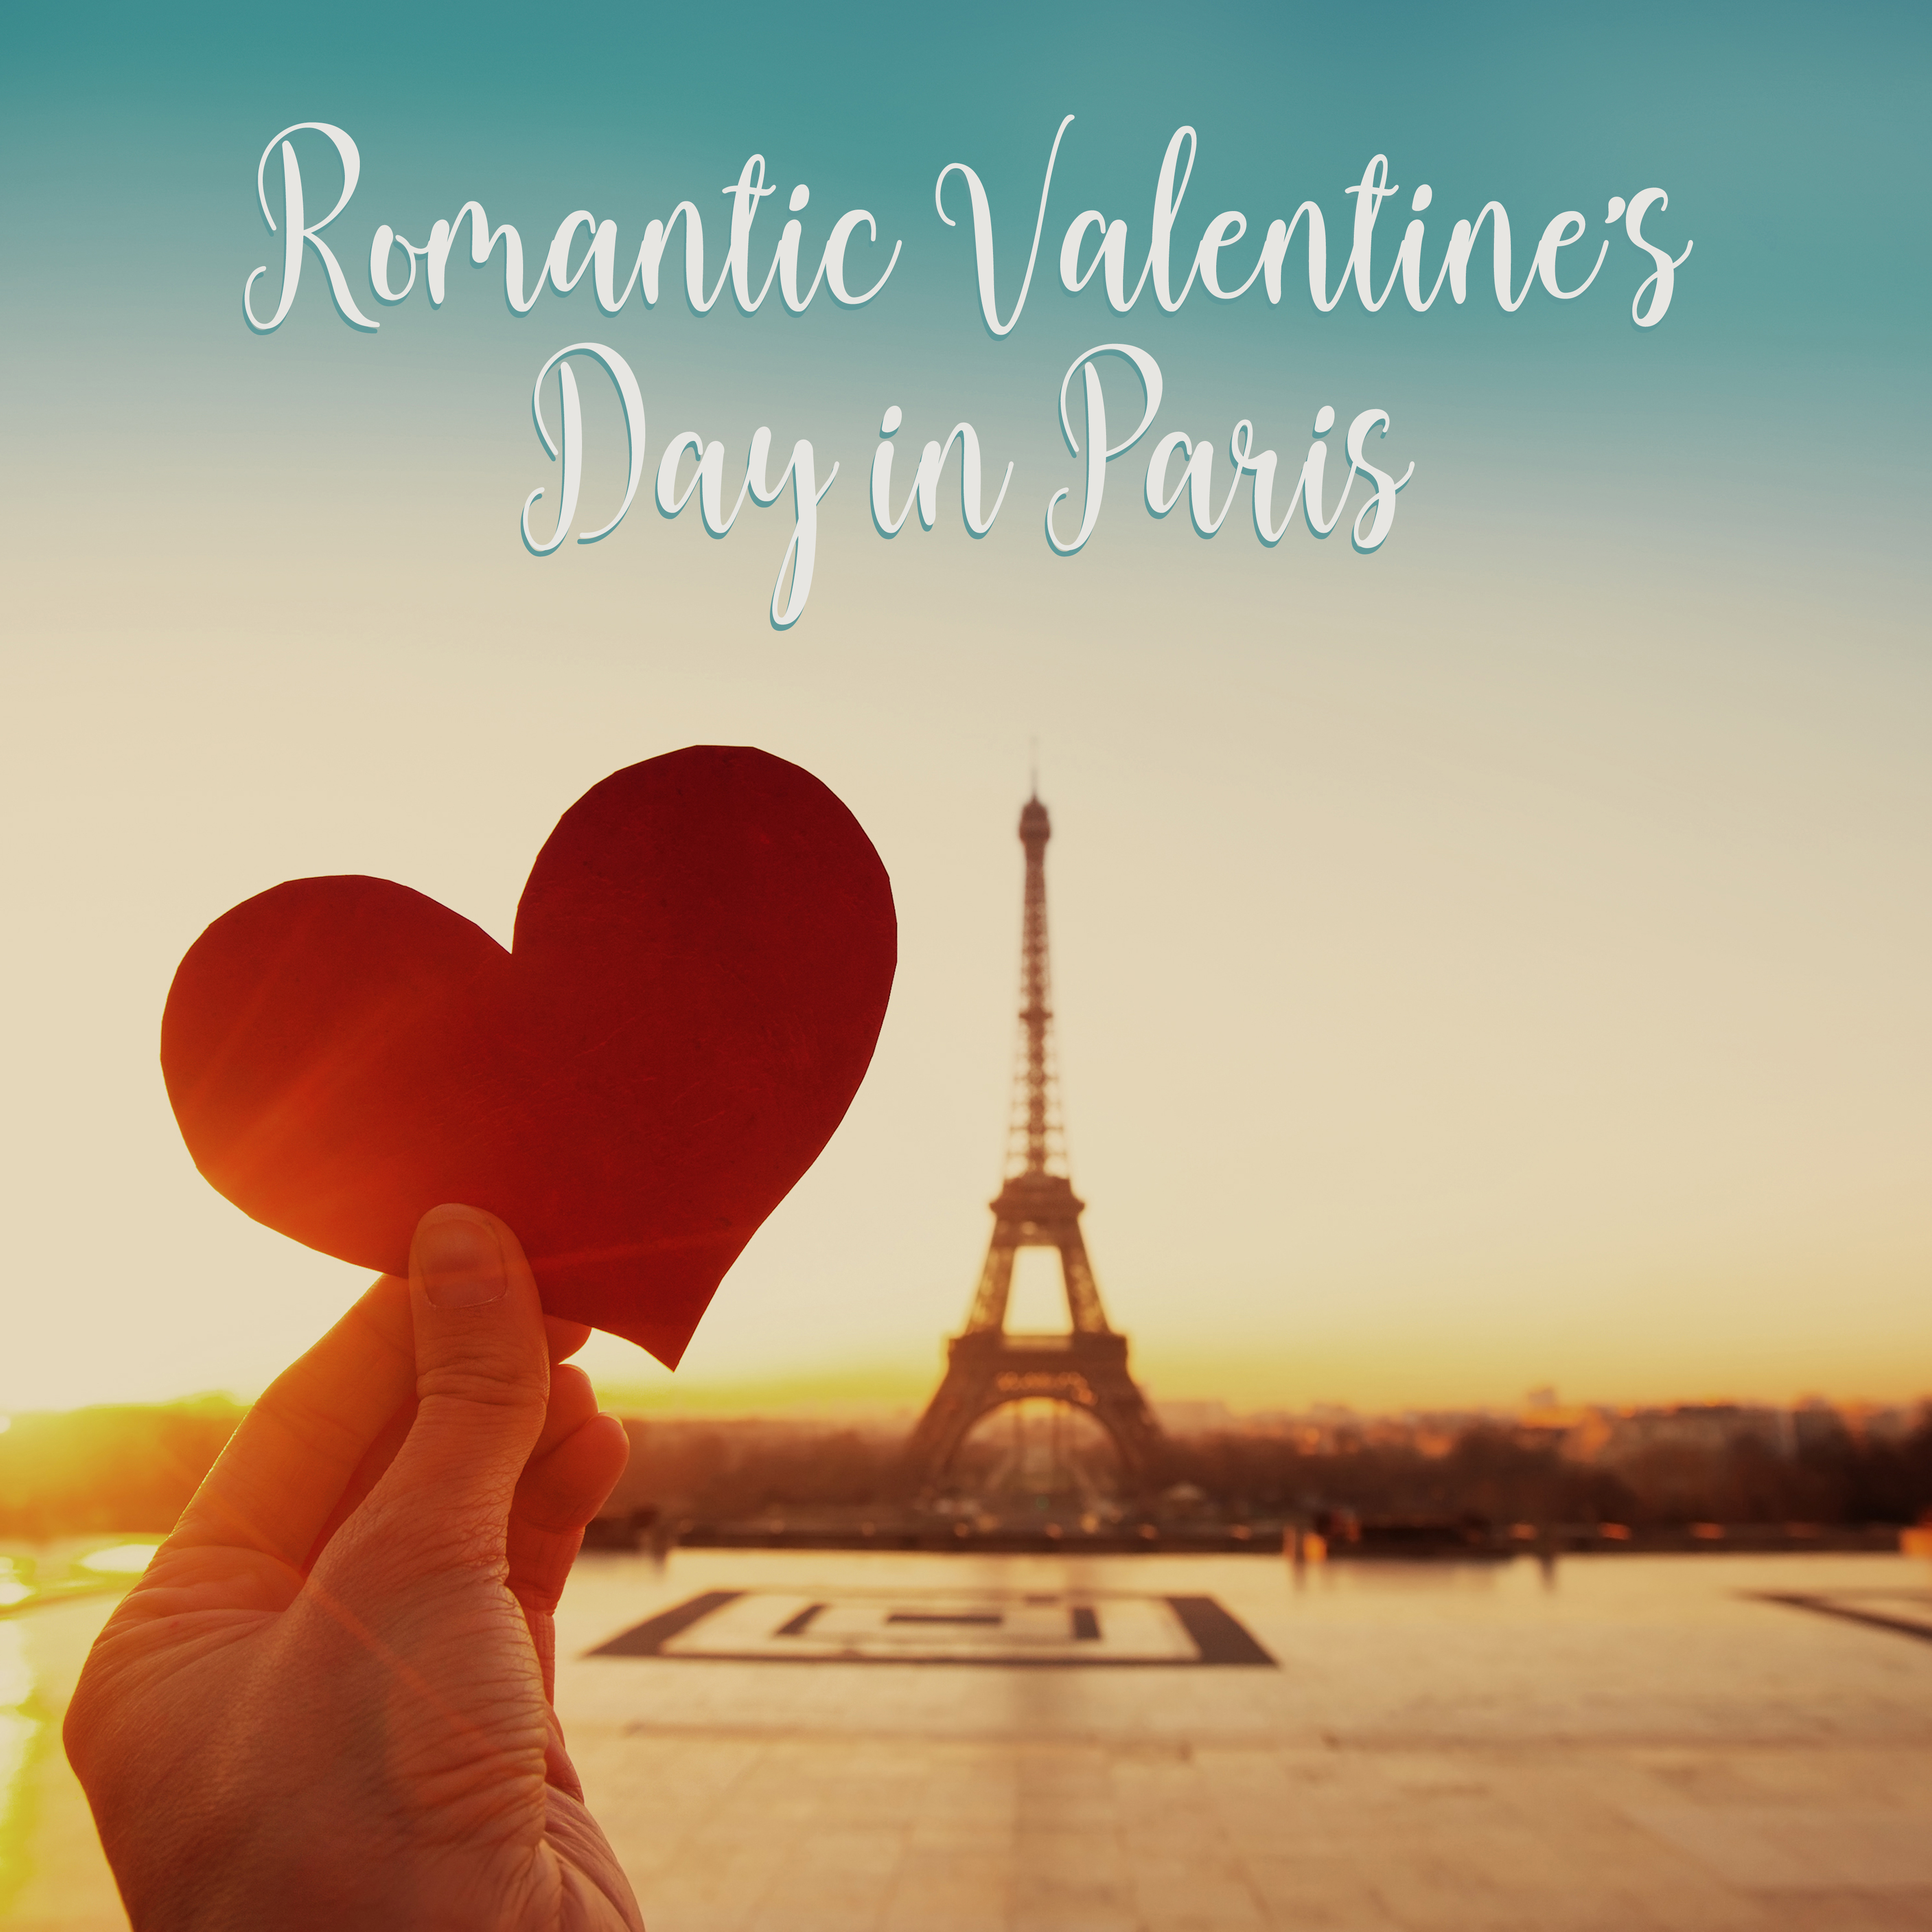 Romantic Valentine' s Day in Paris  Piano Jazz Soft Melodies for Couples, Making Love Music 2019